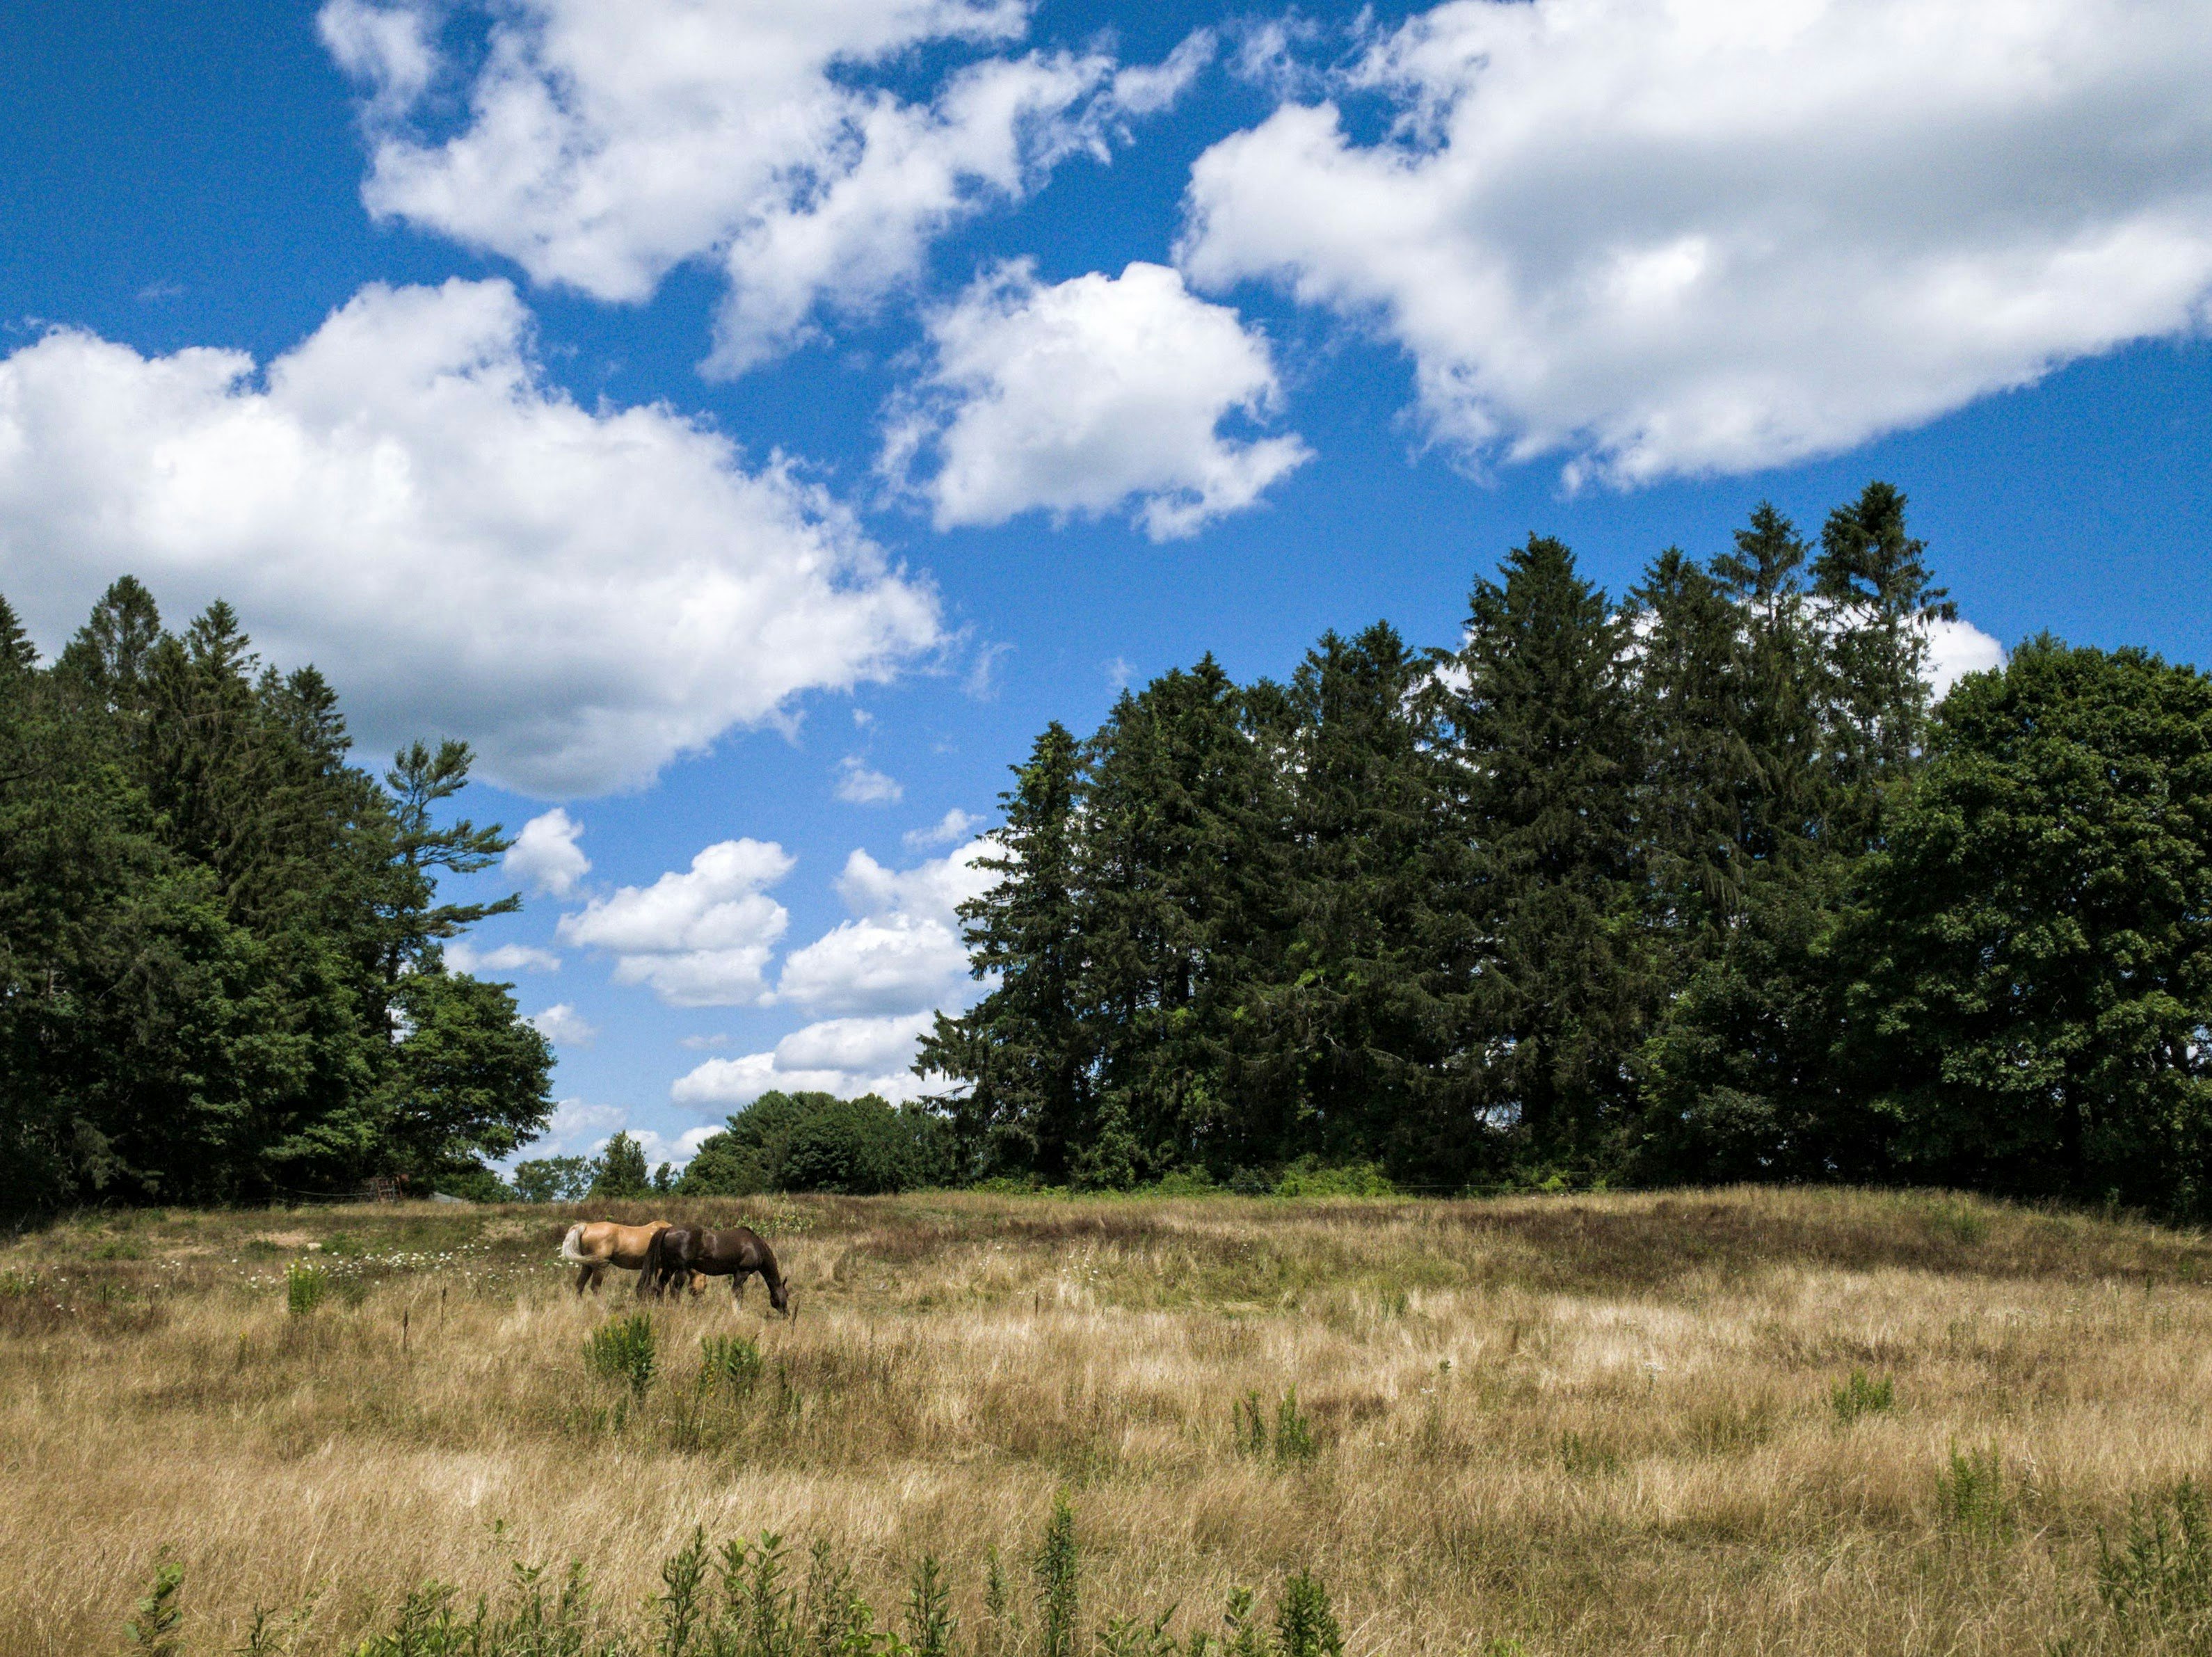 brown horse on brown grass field near green trees under blue and white cloudy sky during